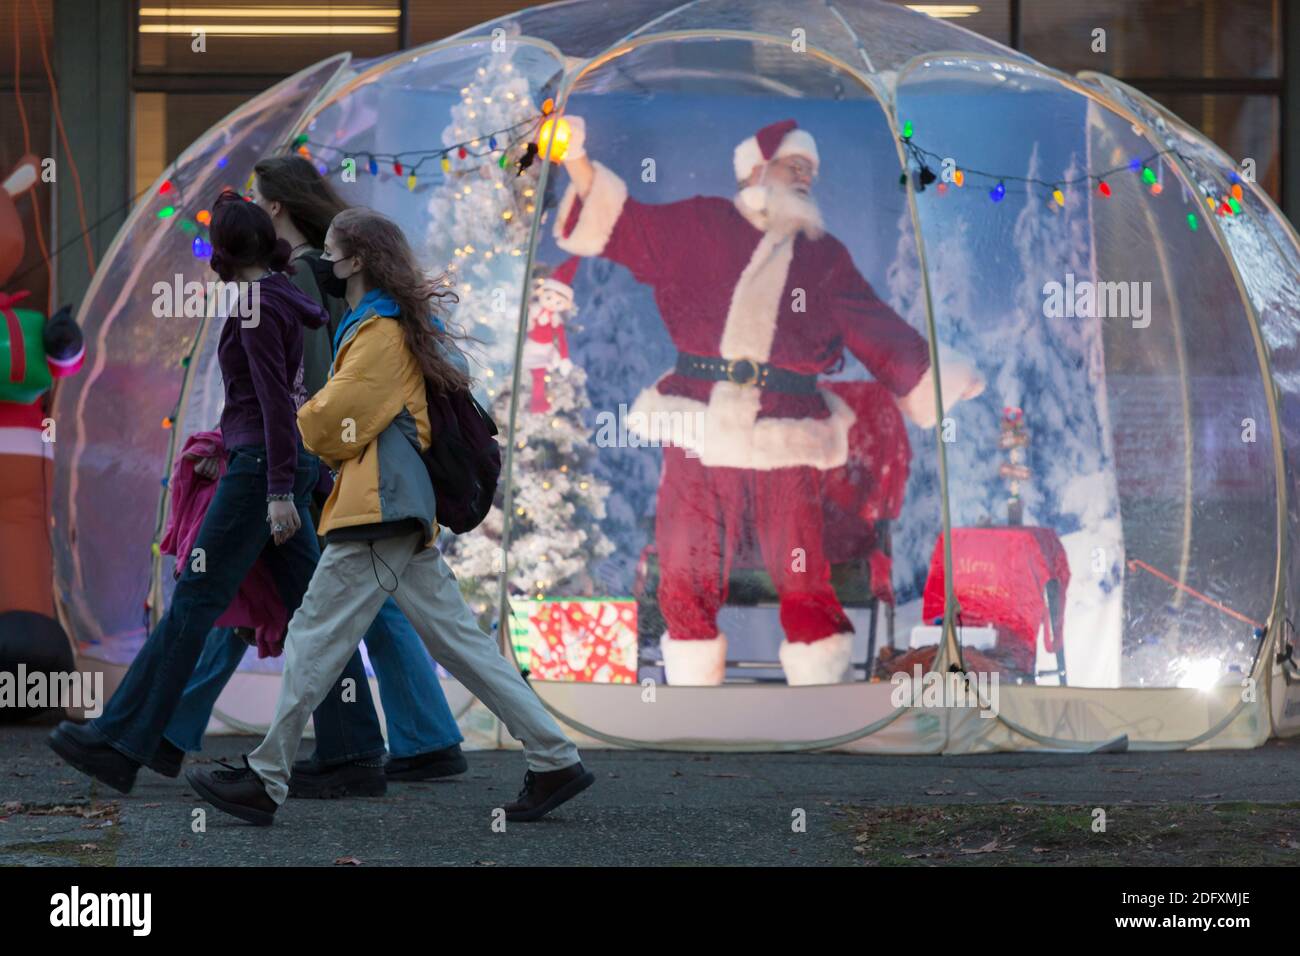 Seattle, Washington, USA. 6th December, 2020. Dan Kemmis, known as the Seattle Santa, stretches as a group of young women walk by his protective plastic bubble in Seattle’s Greenwood neighborhood. Unable to schedule private events due to the coronavirus pandemic, Kemmis is making physically distanced public appearances with some donations benefiting local homeless shelters. Credit: Paul Christian Gordon/Alamy Live News Stock Photo